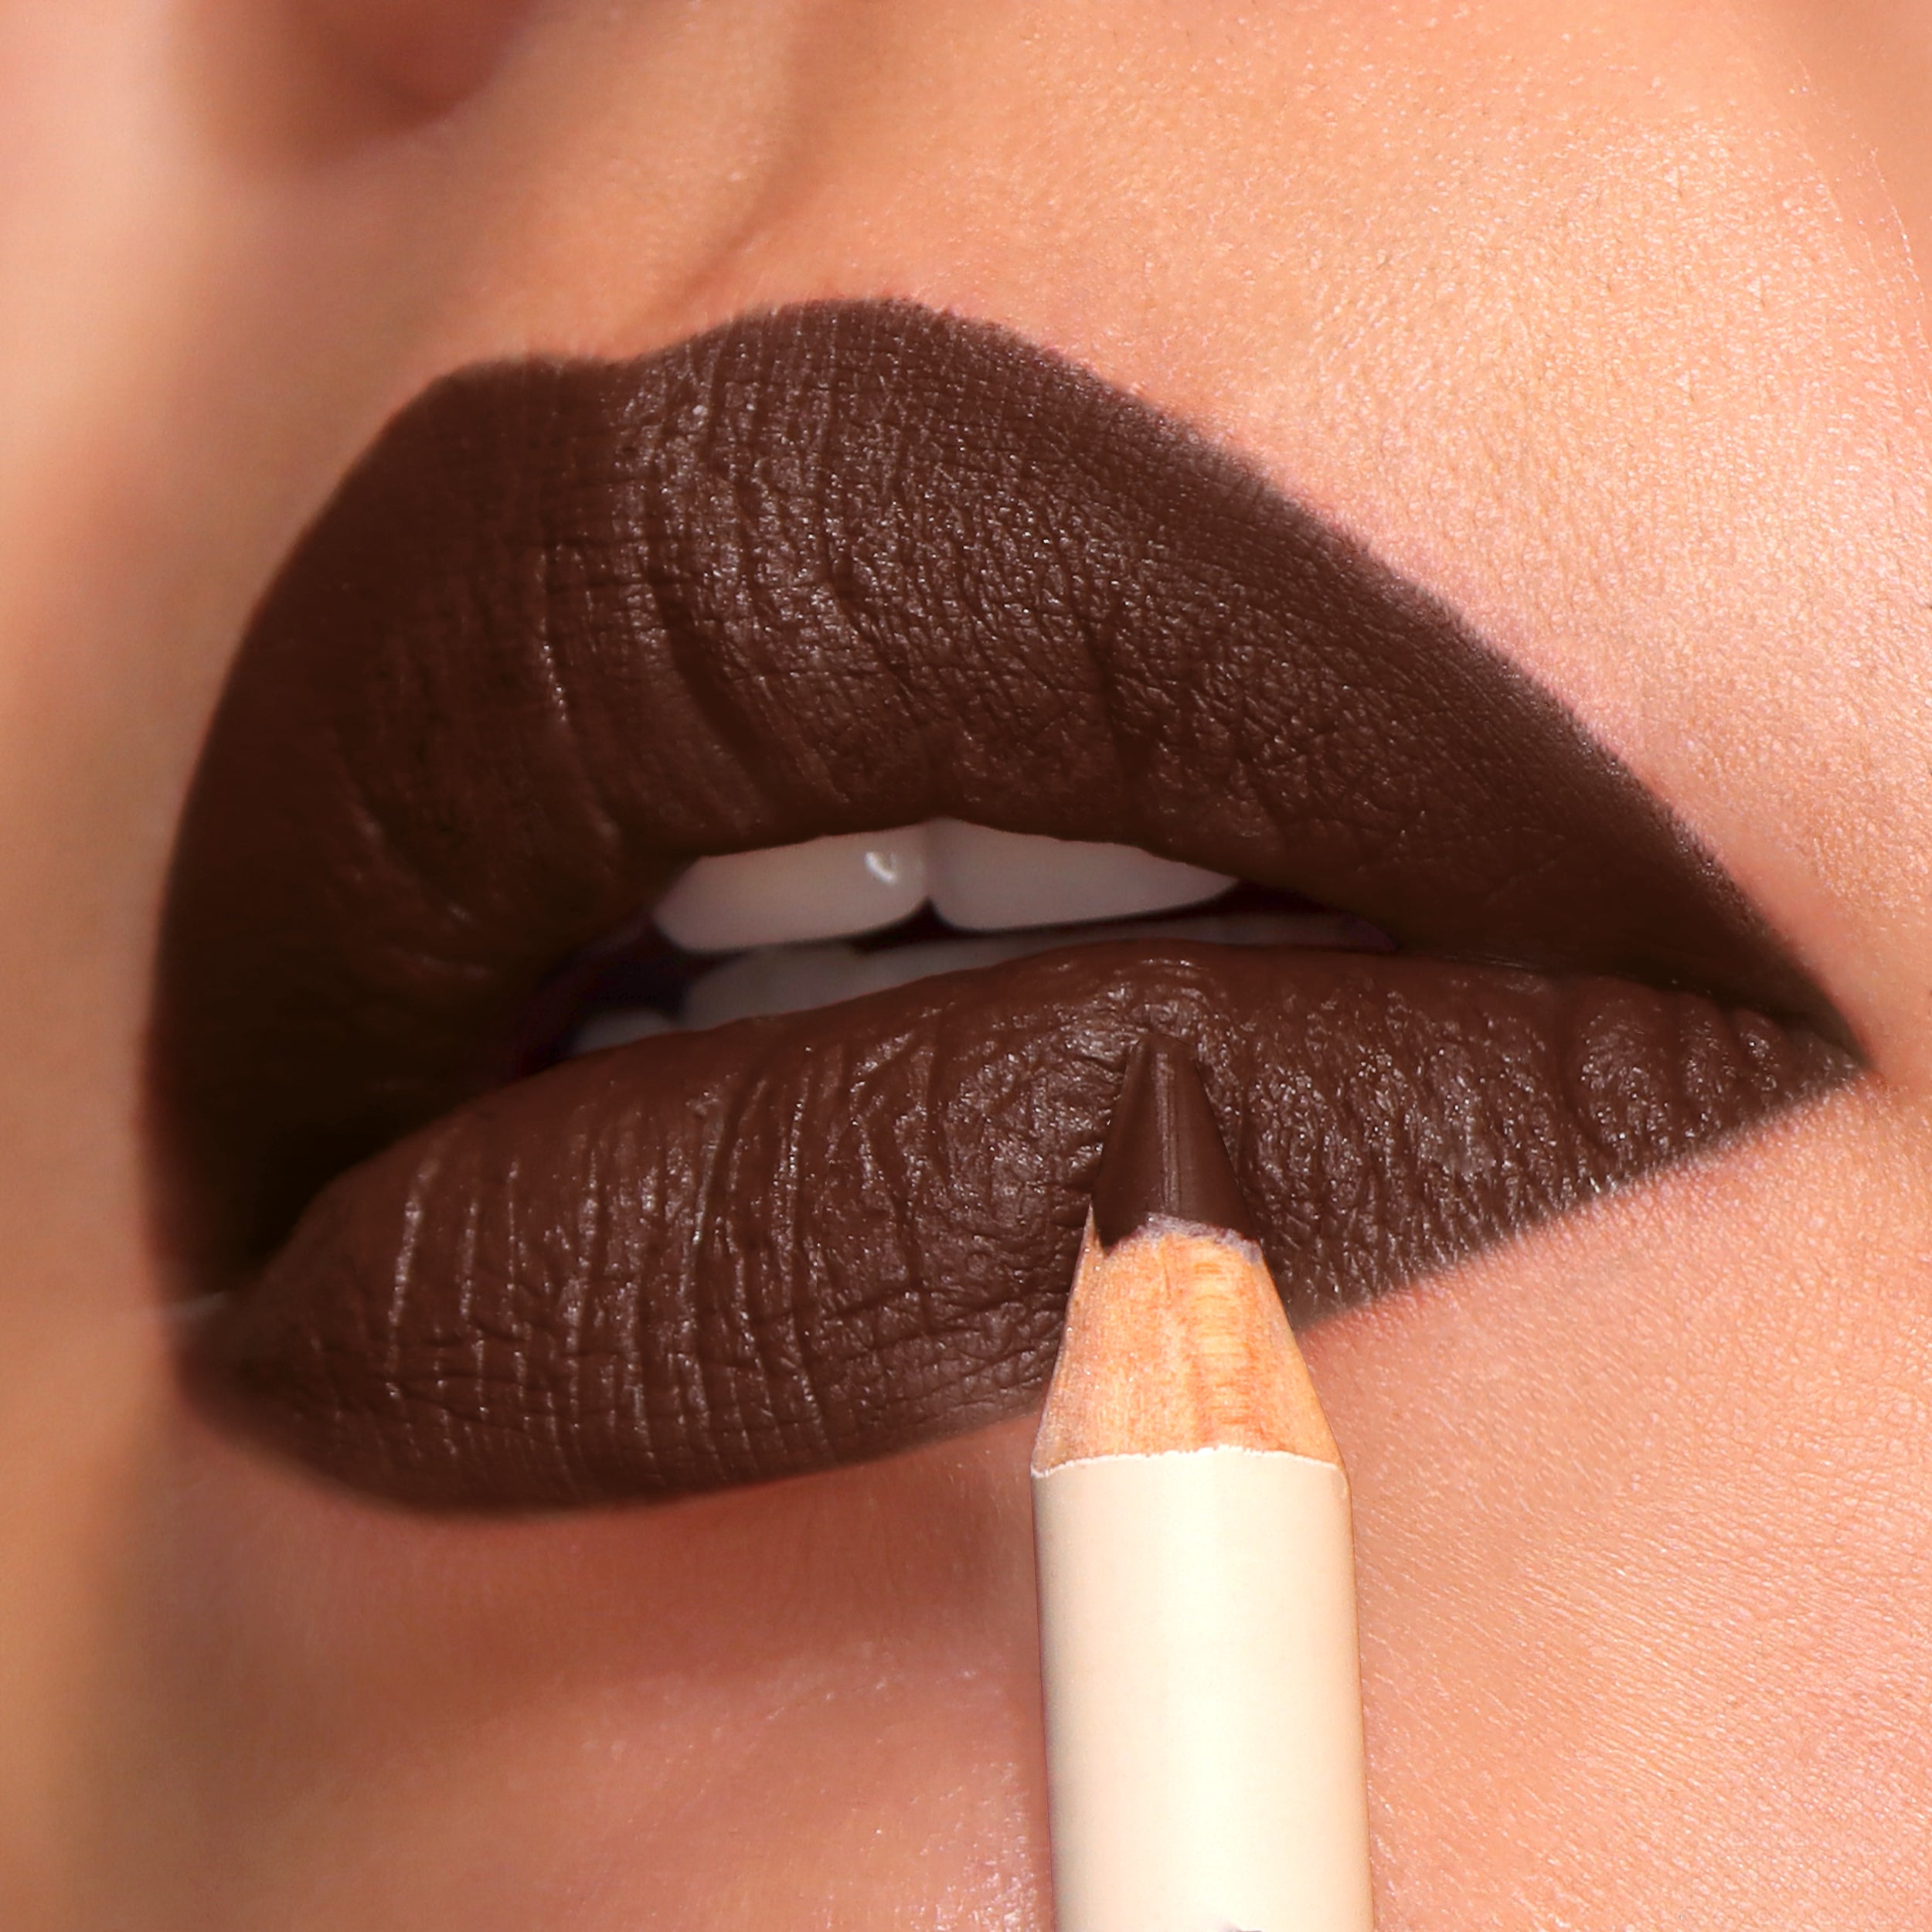 Must-Have Lip Liner (012, Cocoa)